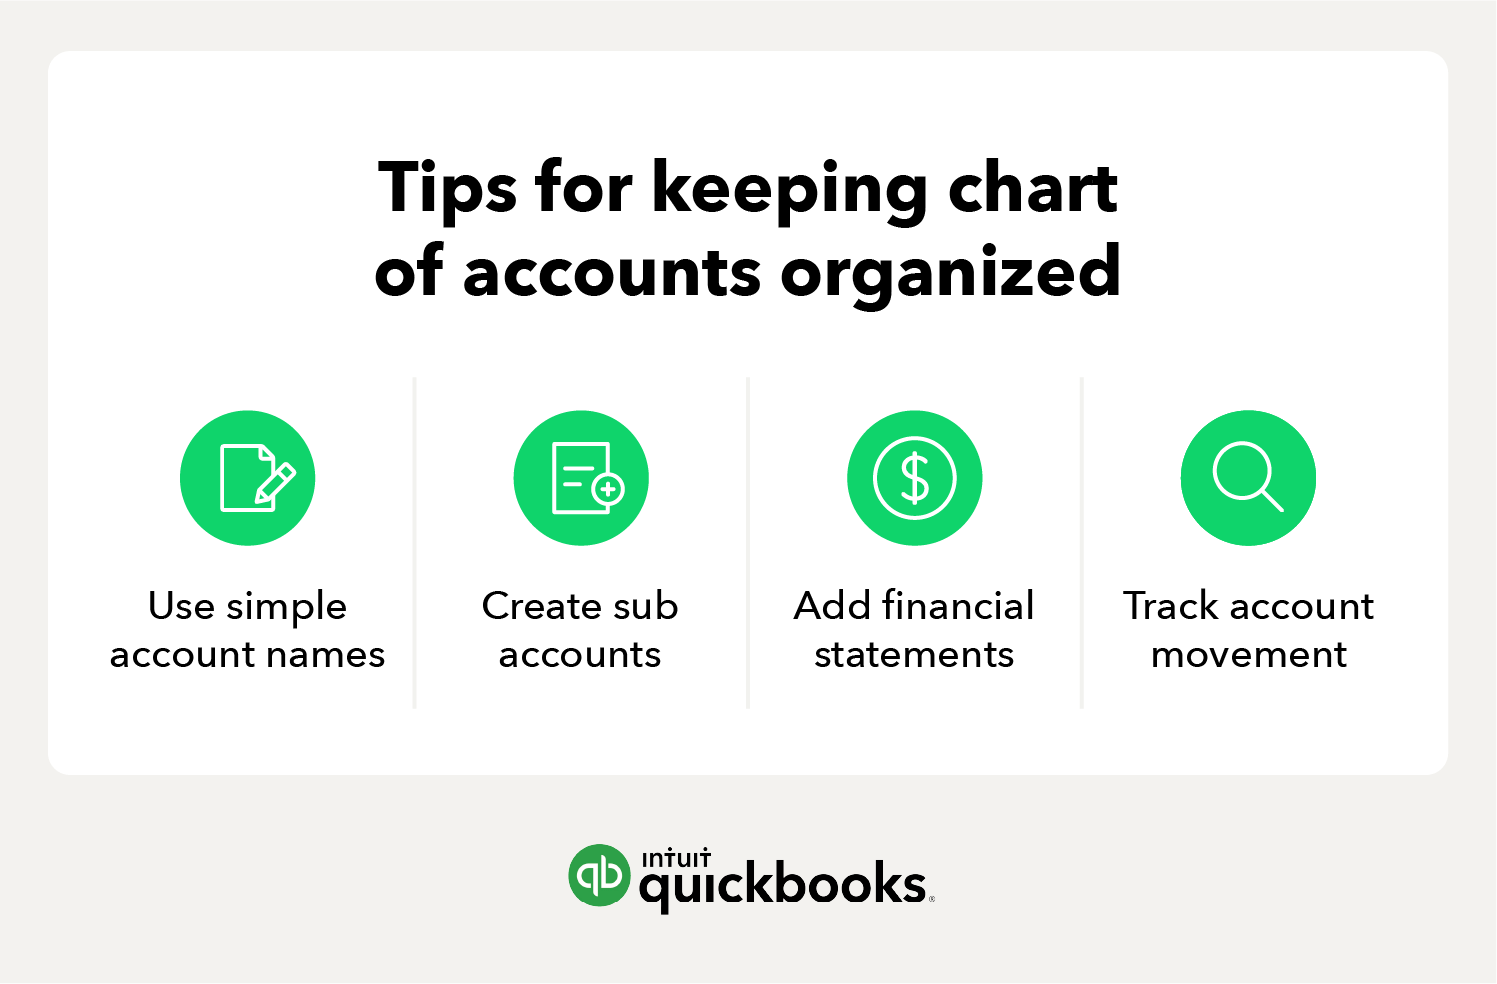 illustration of 4 tips on how to keep the chart of accounts organized